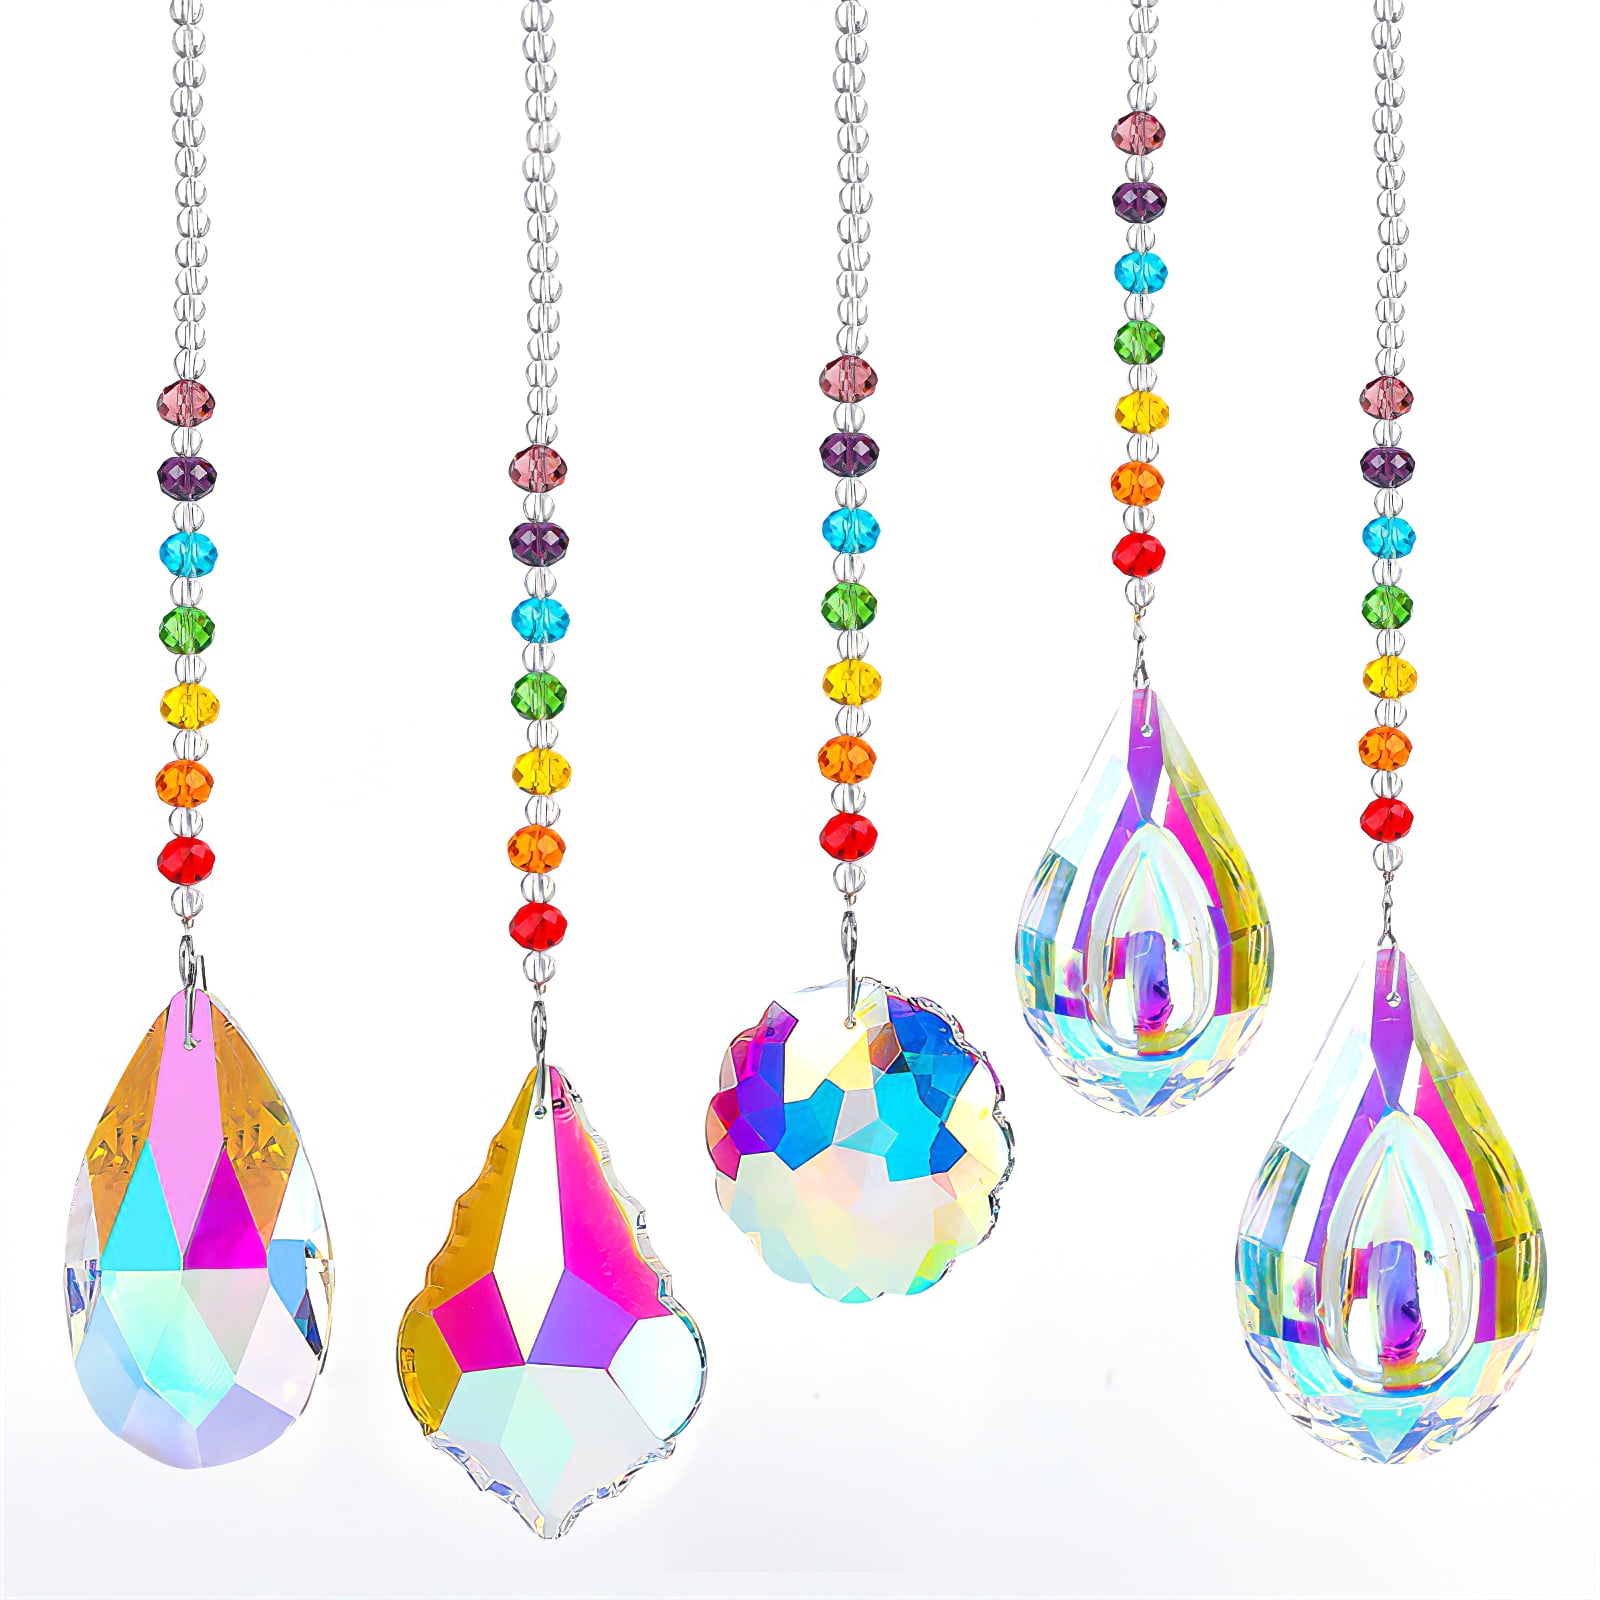 Details about   Crystals Suncatcher Glass Bead Chains Hanging for Home Garden Window Decor 